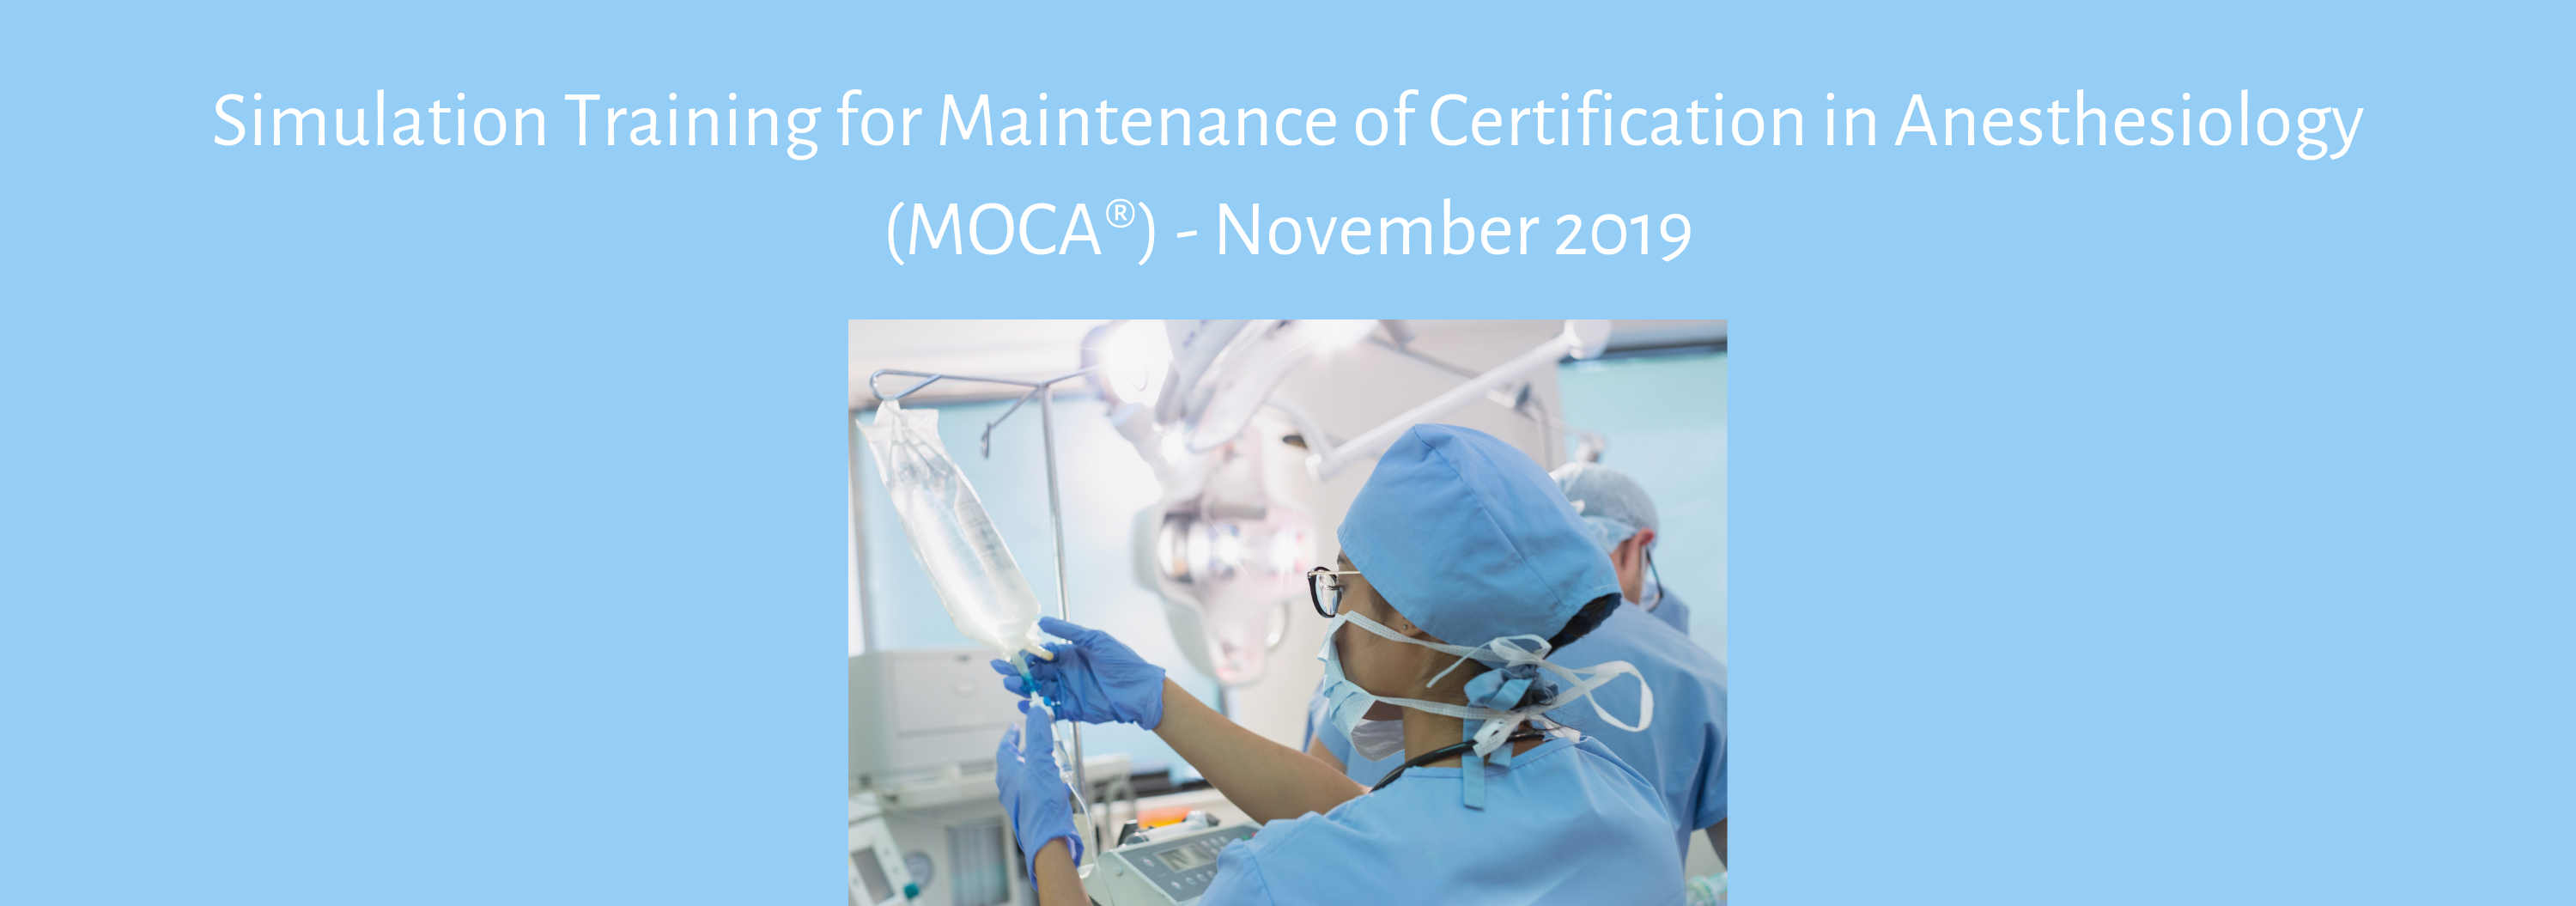 Simulation Training for Maintenance of Certification in Anesthesiology (MOCA®) - November 2019 Banner